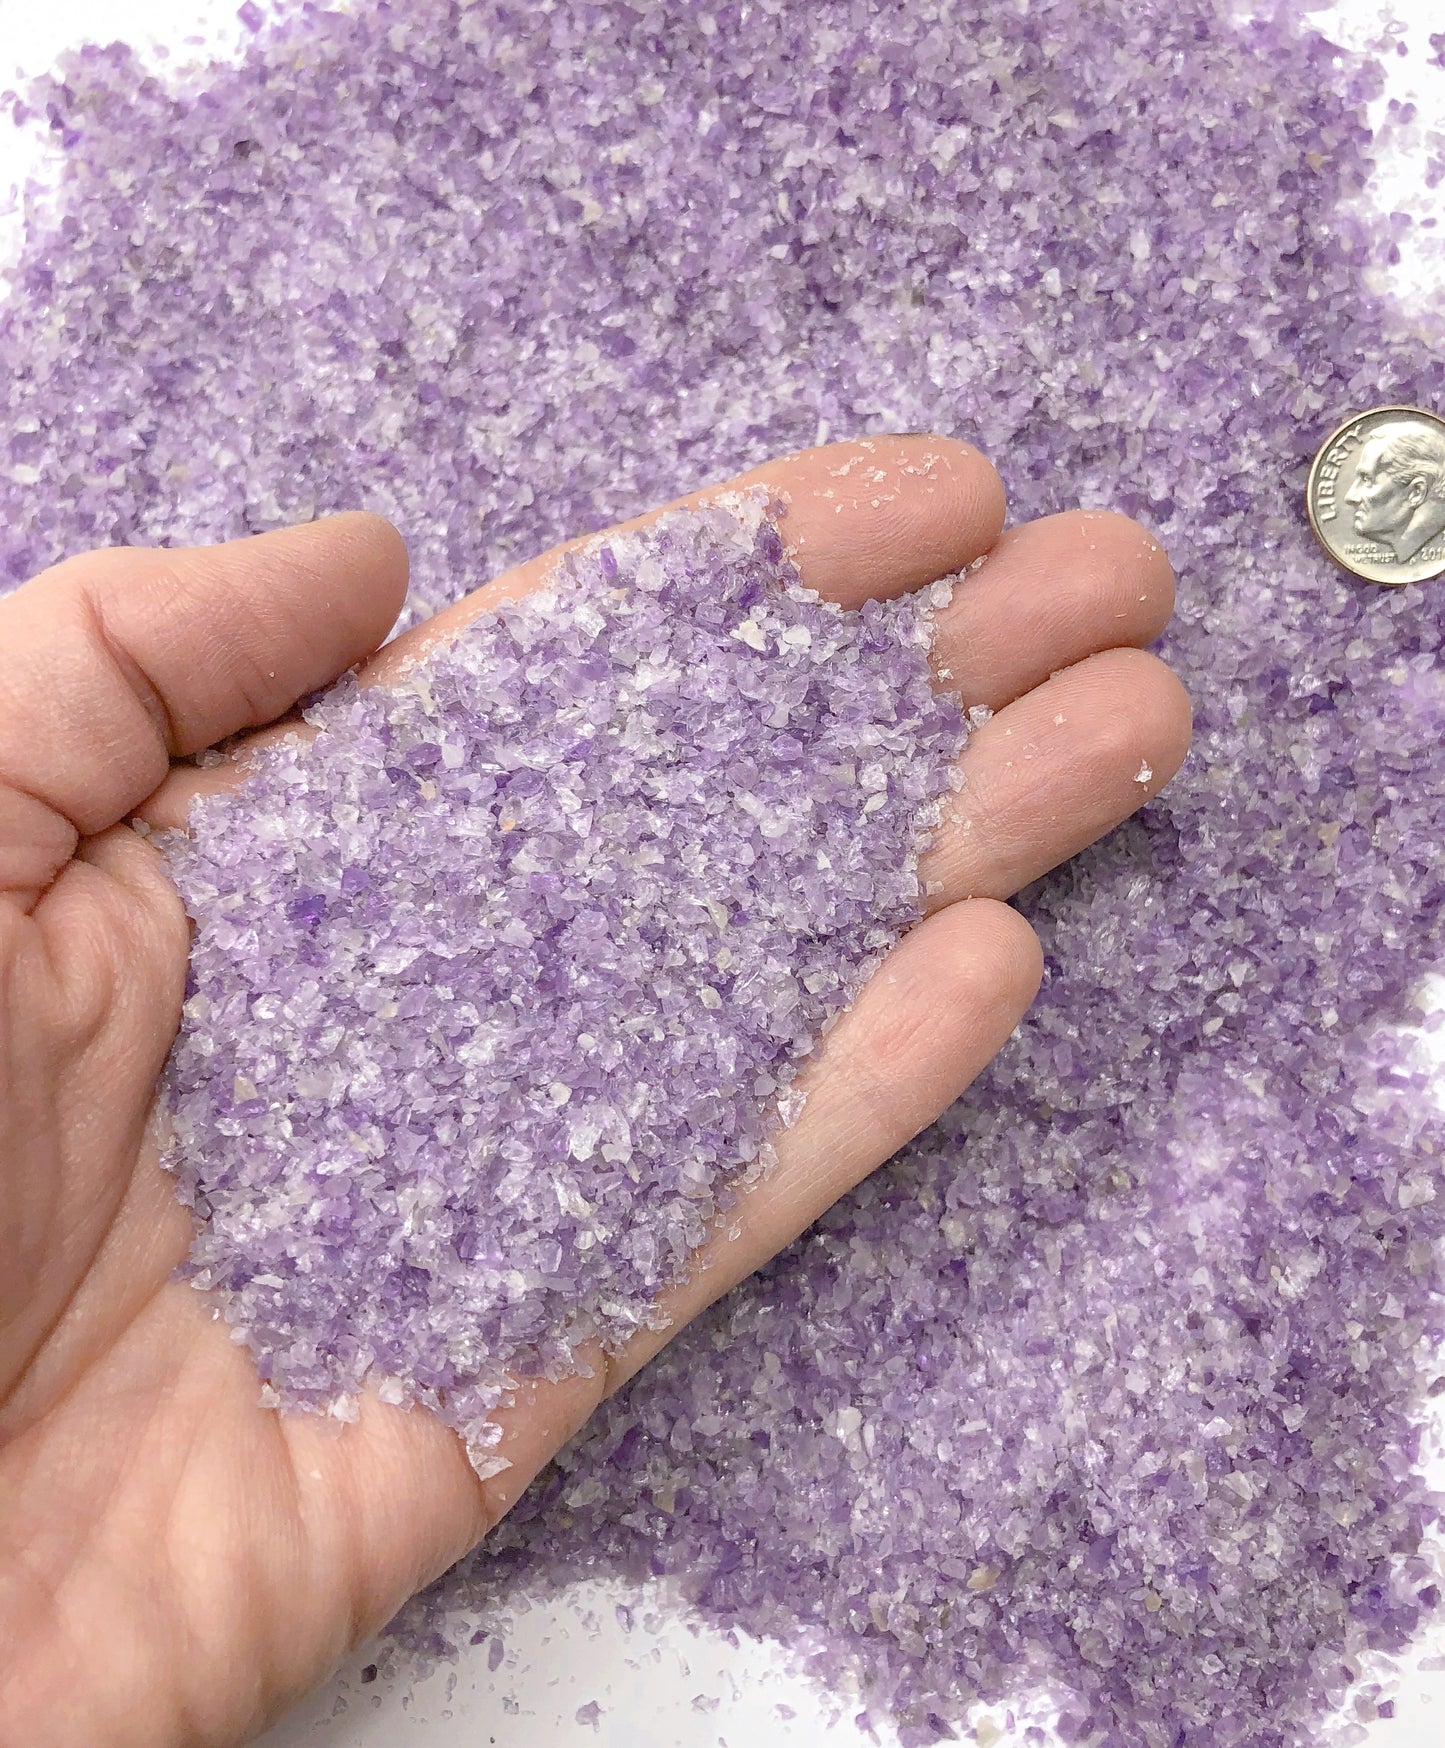 Crushed Purple Amethyst (Grade A) from Namibia, Medium Crush, Sand Size, 2mm - 0.25mm